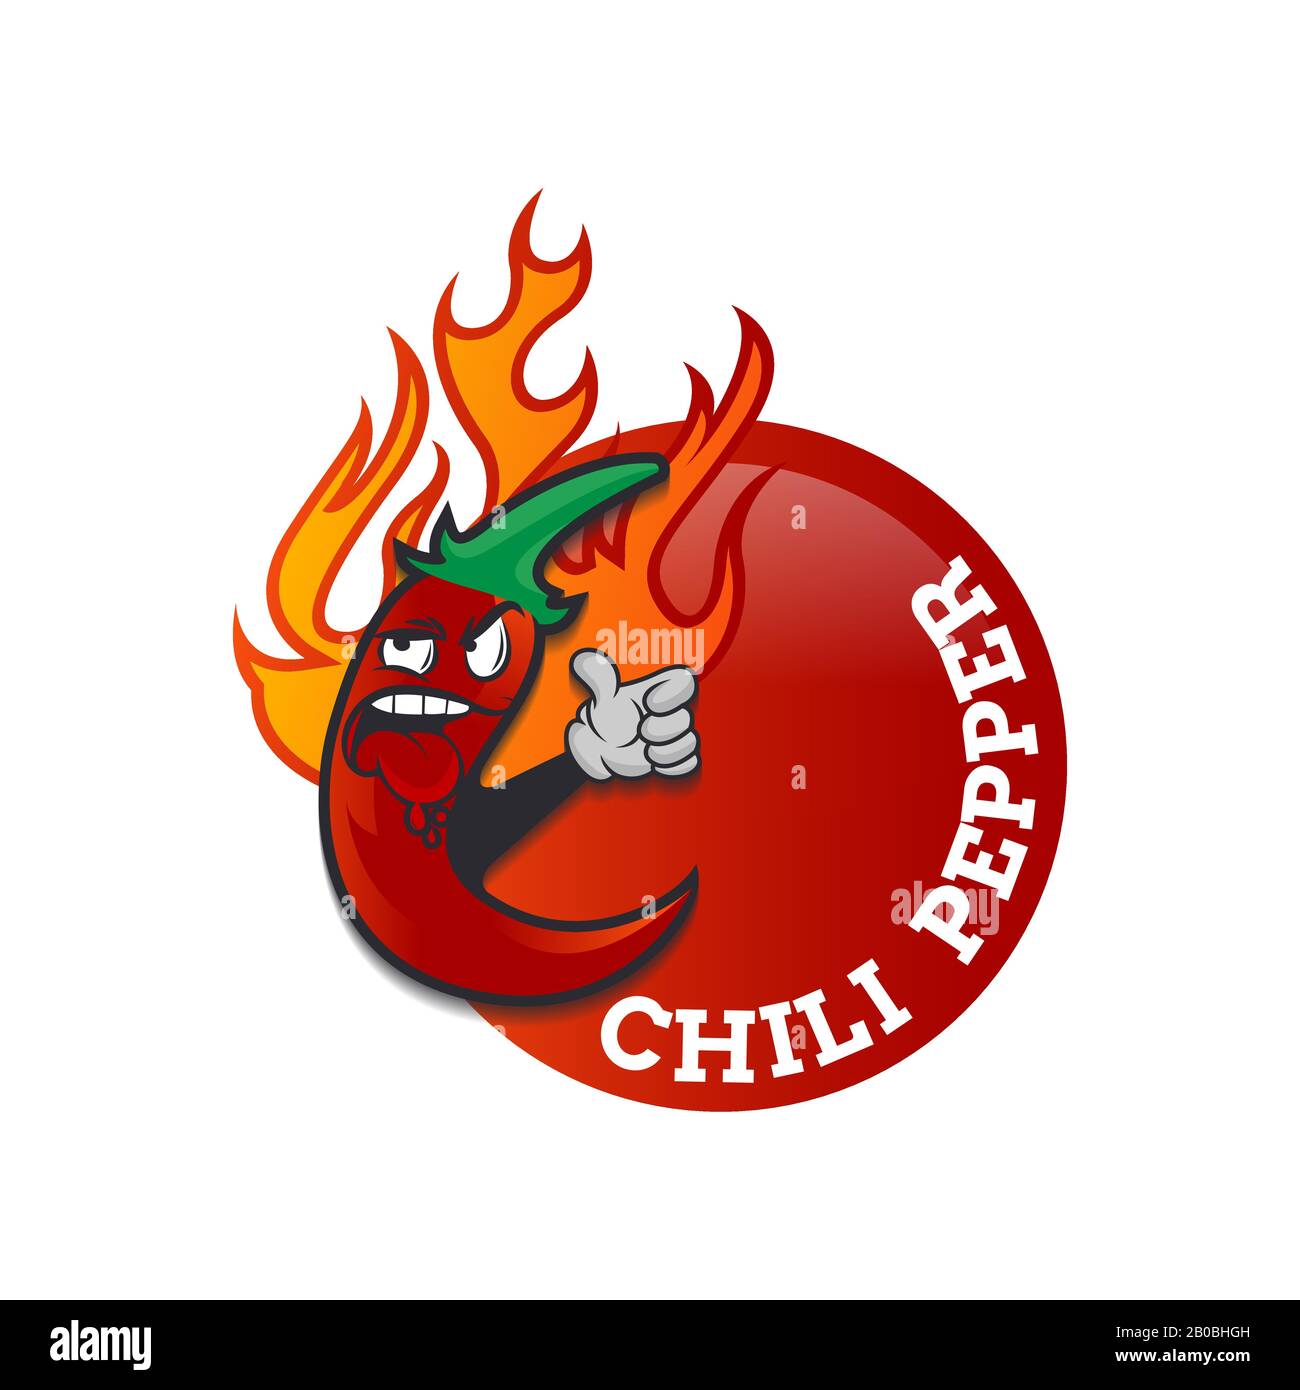 Chili Pepper Cartoon Mascot Logo template. Mexican Fast food logotype template. Isolated vector illustration. Stock Vector